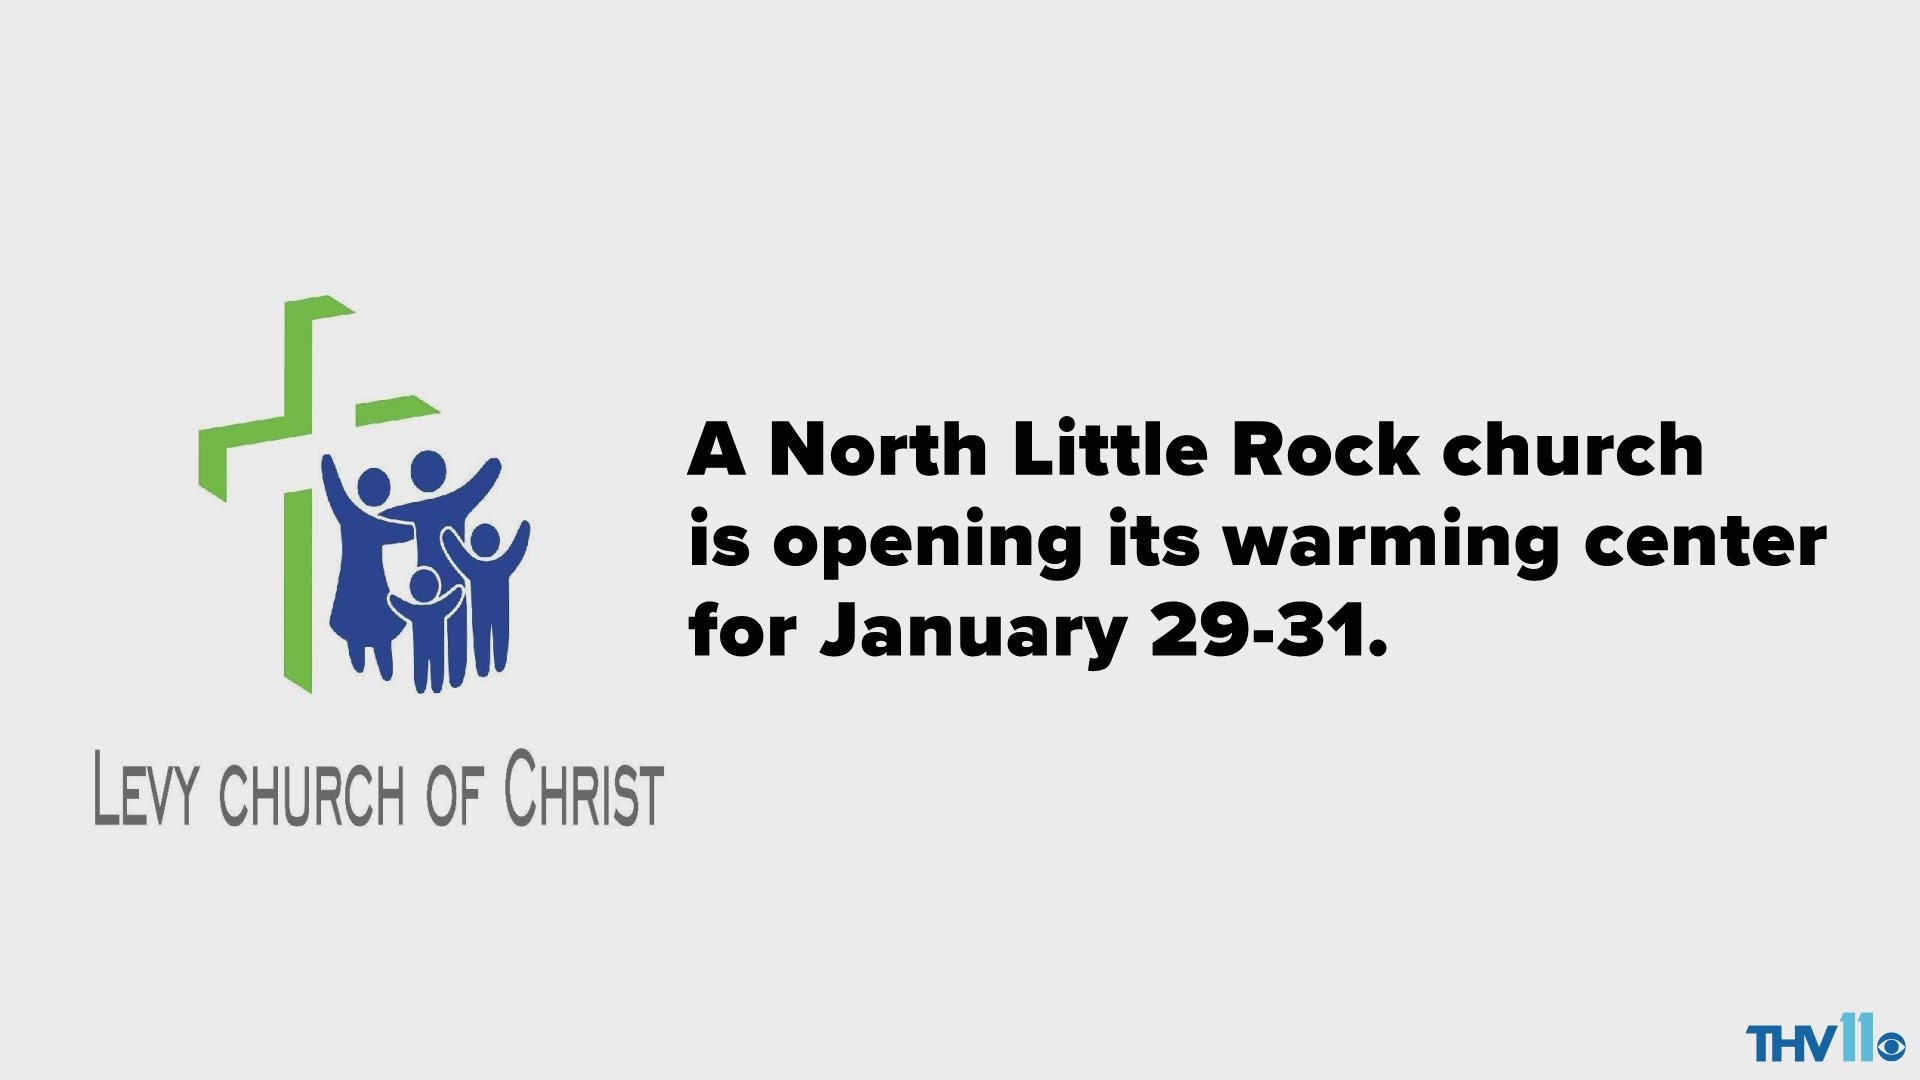 Levy Church of Christ opened their warming center and overnight shelter for the cold weather.